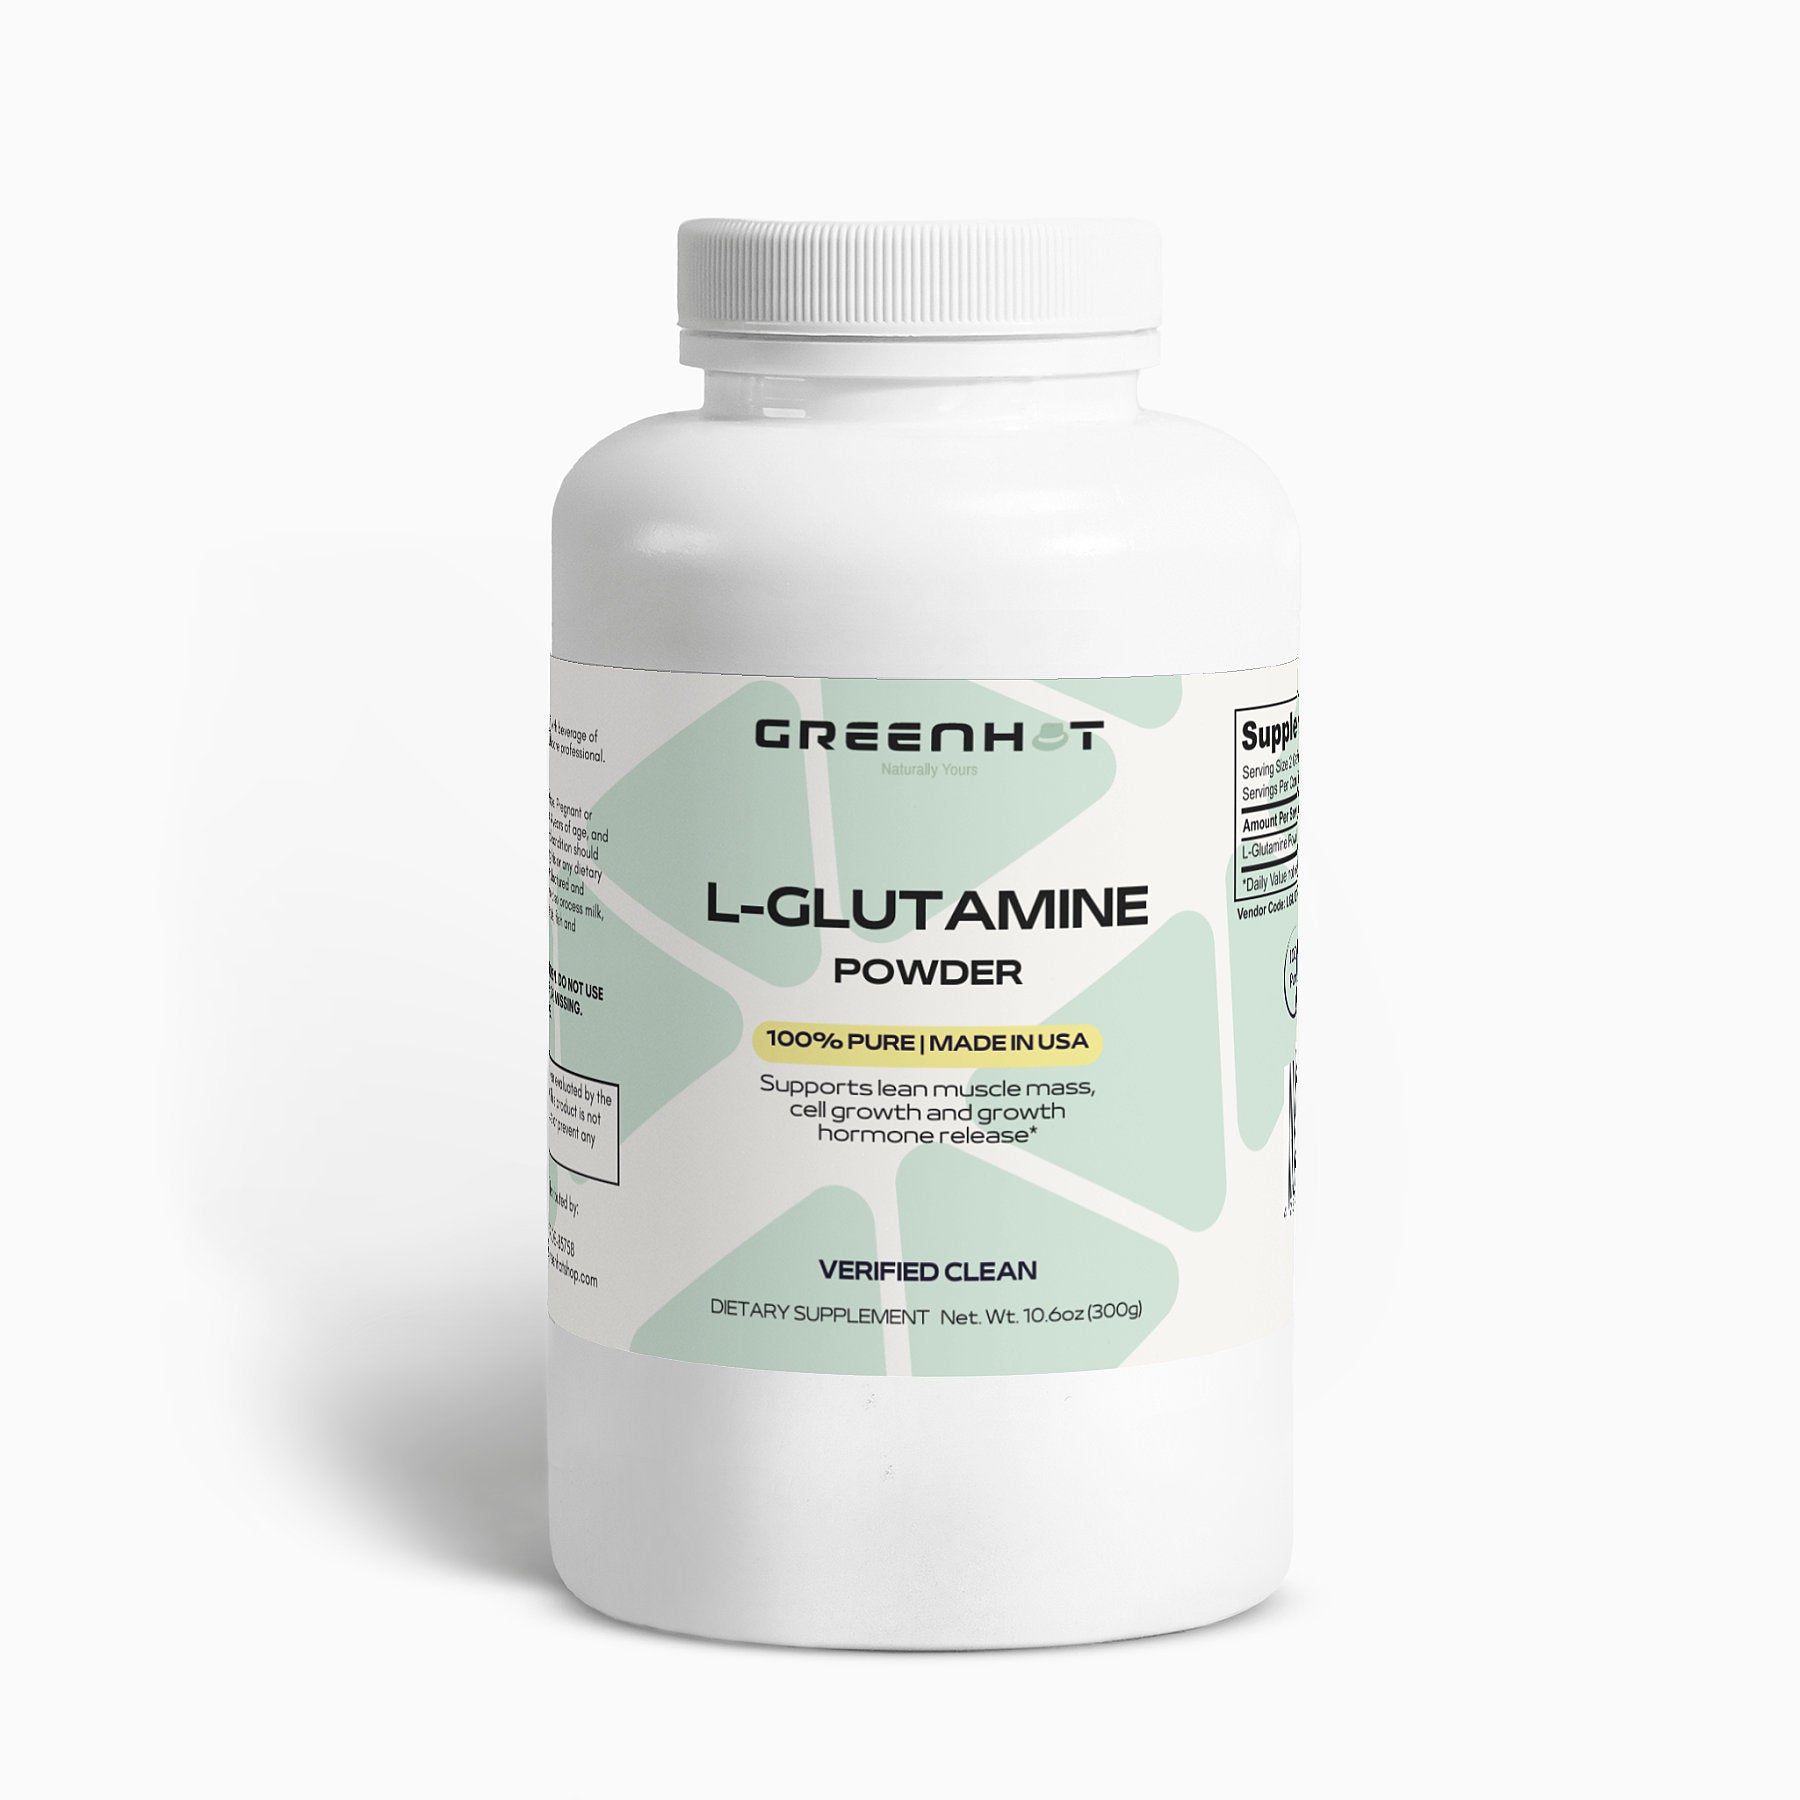 White supplement bottle labeled "GreenHat L-Glutamine Powder" for muscle recovery against a plain background.